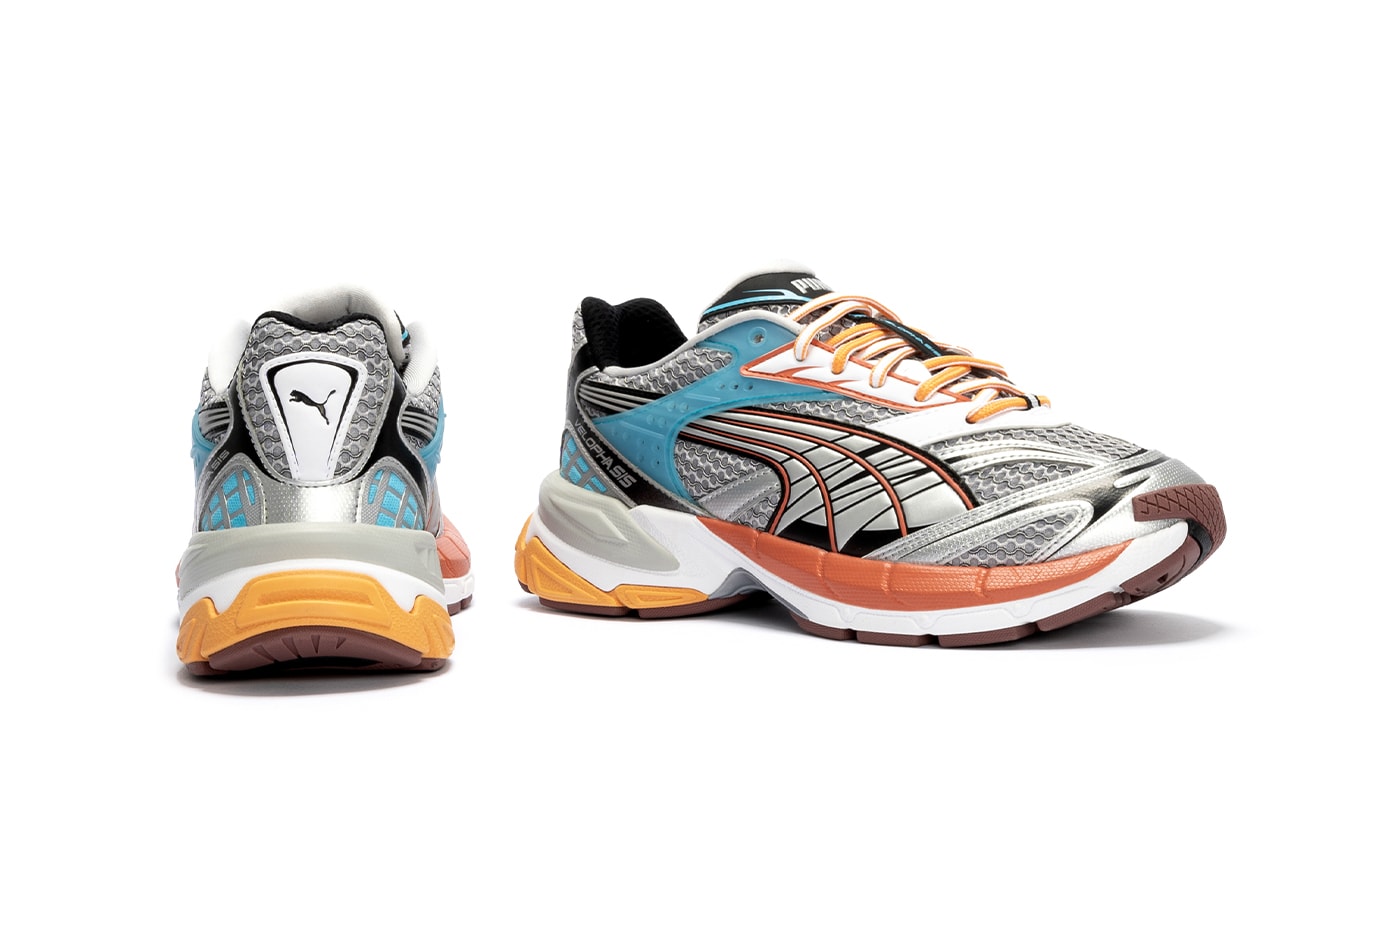 puma velophasis bionic phased new footwear sneaker silhouette release info date price